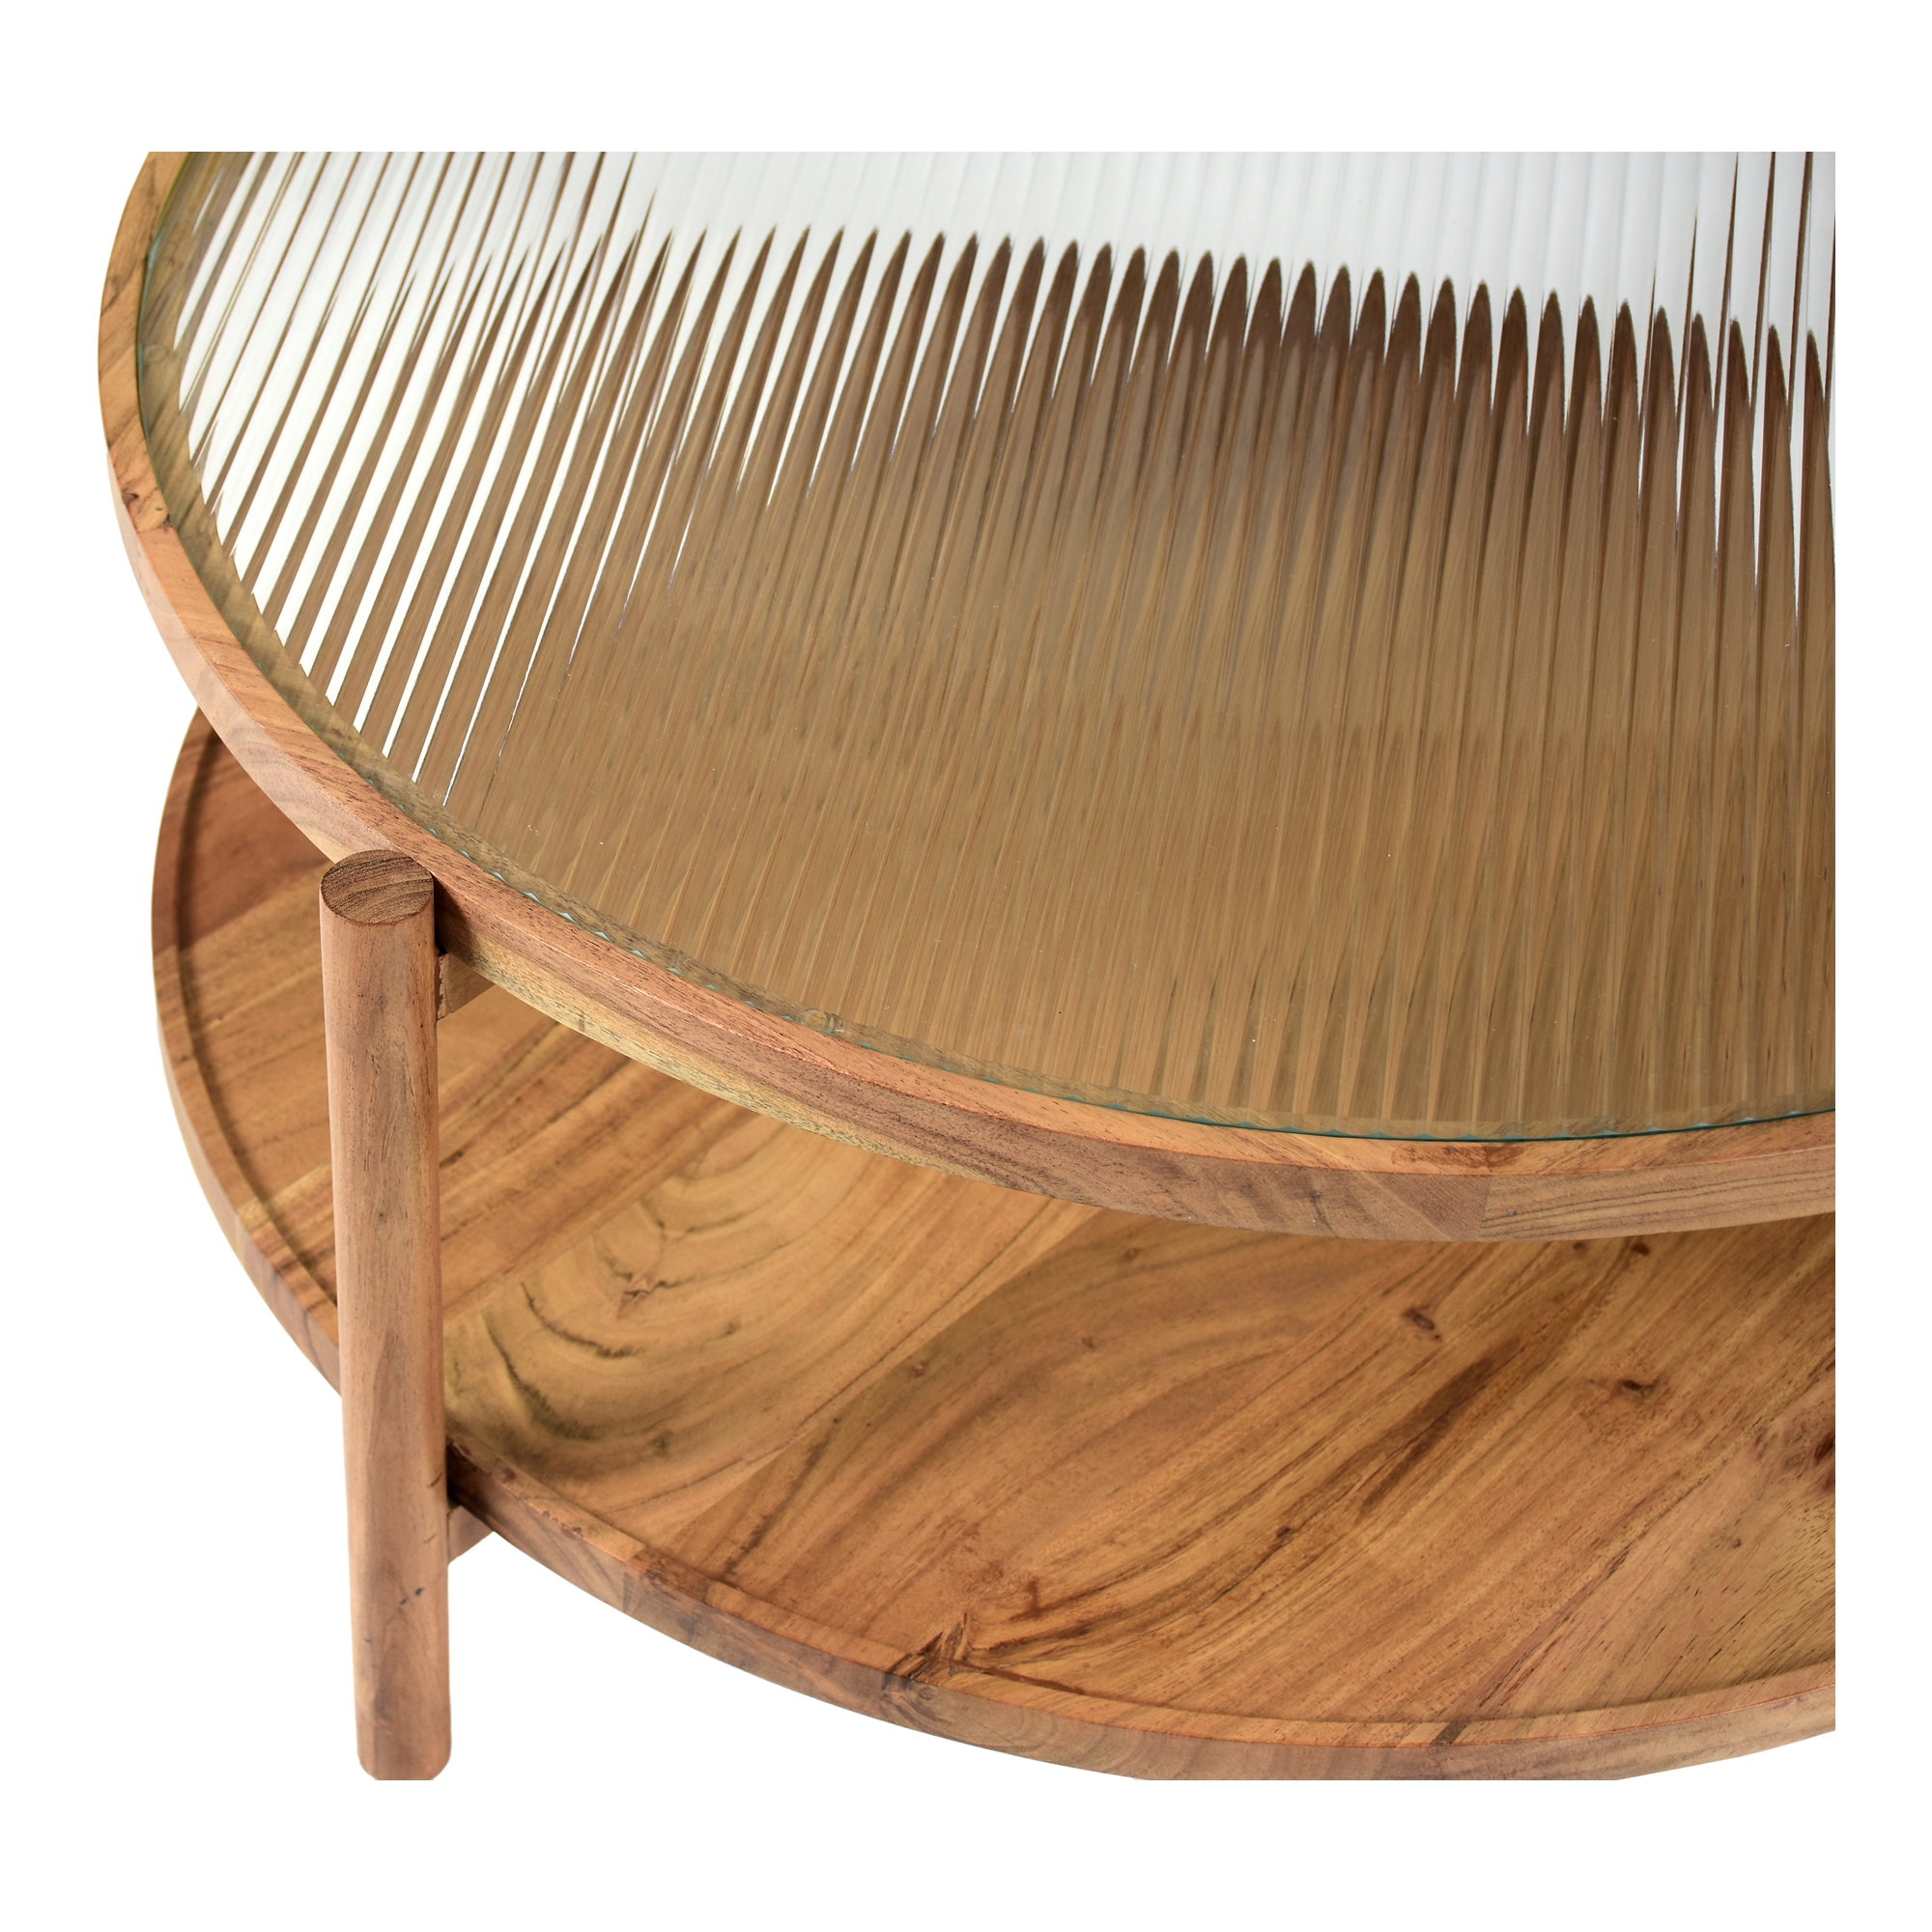 Denz Coffee Table - Image 4